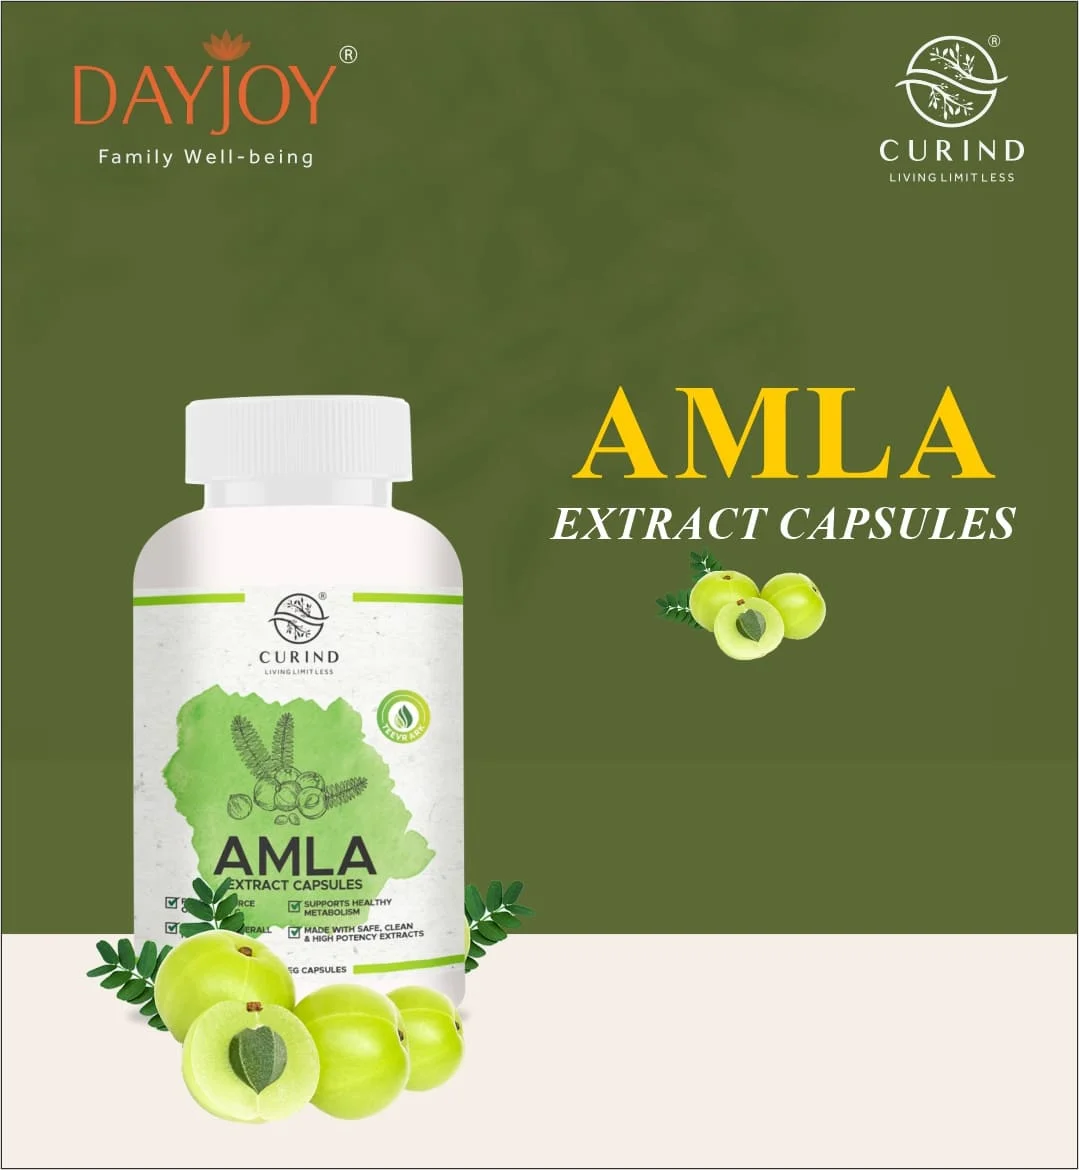 Amla Extract- rich source of vitamin c and support overall health